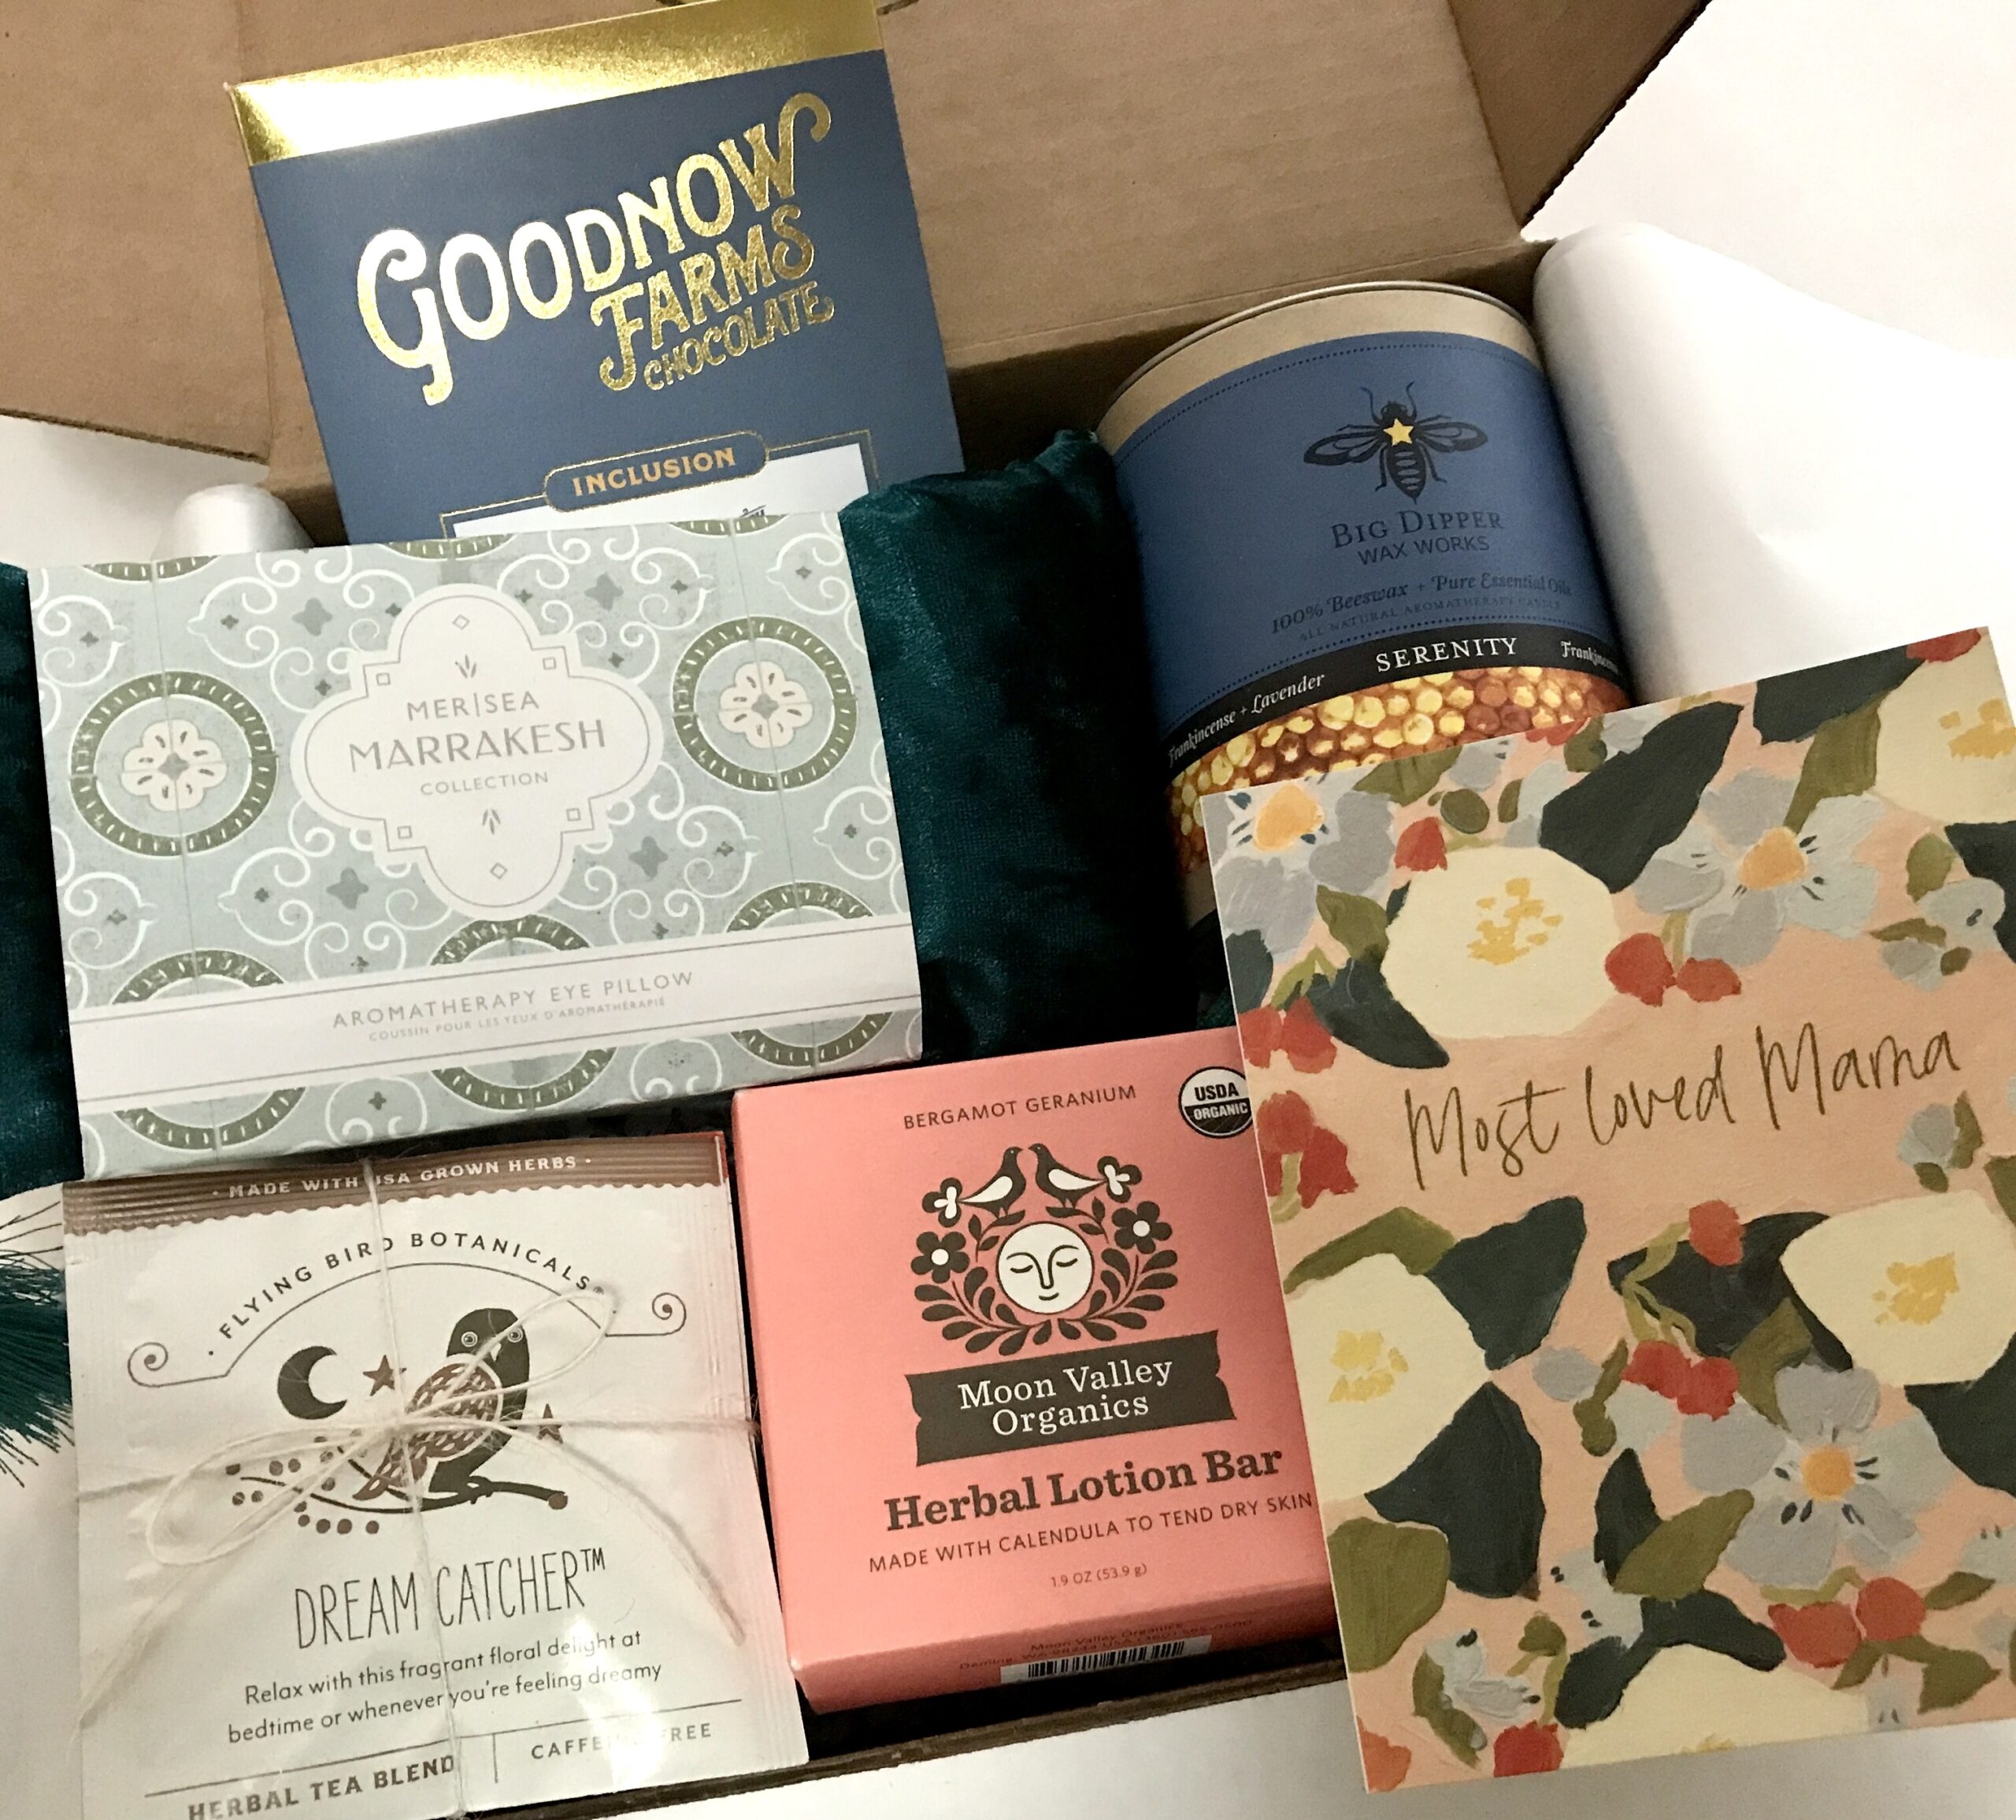 https://www.bumblebdesign.com/wp-content/uploads/2016/04/Mothers-Day-Serenity-Box-Goodnow-scaled.jpg